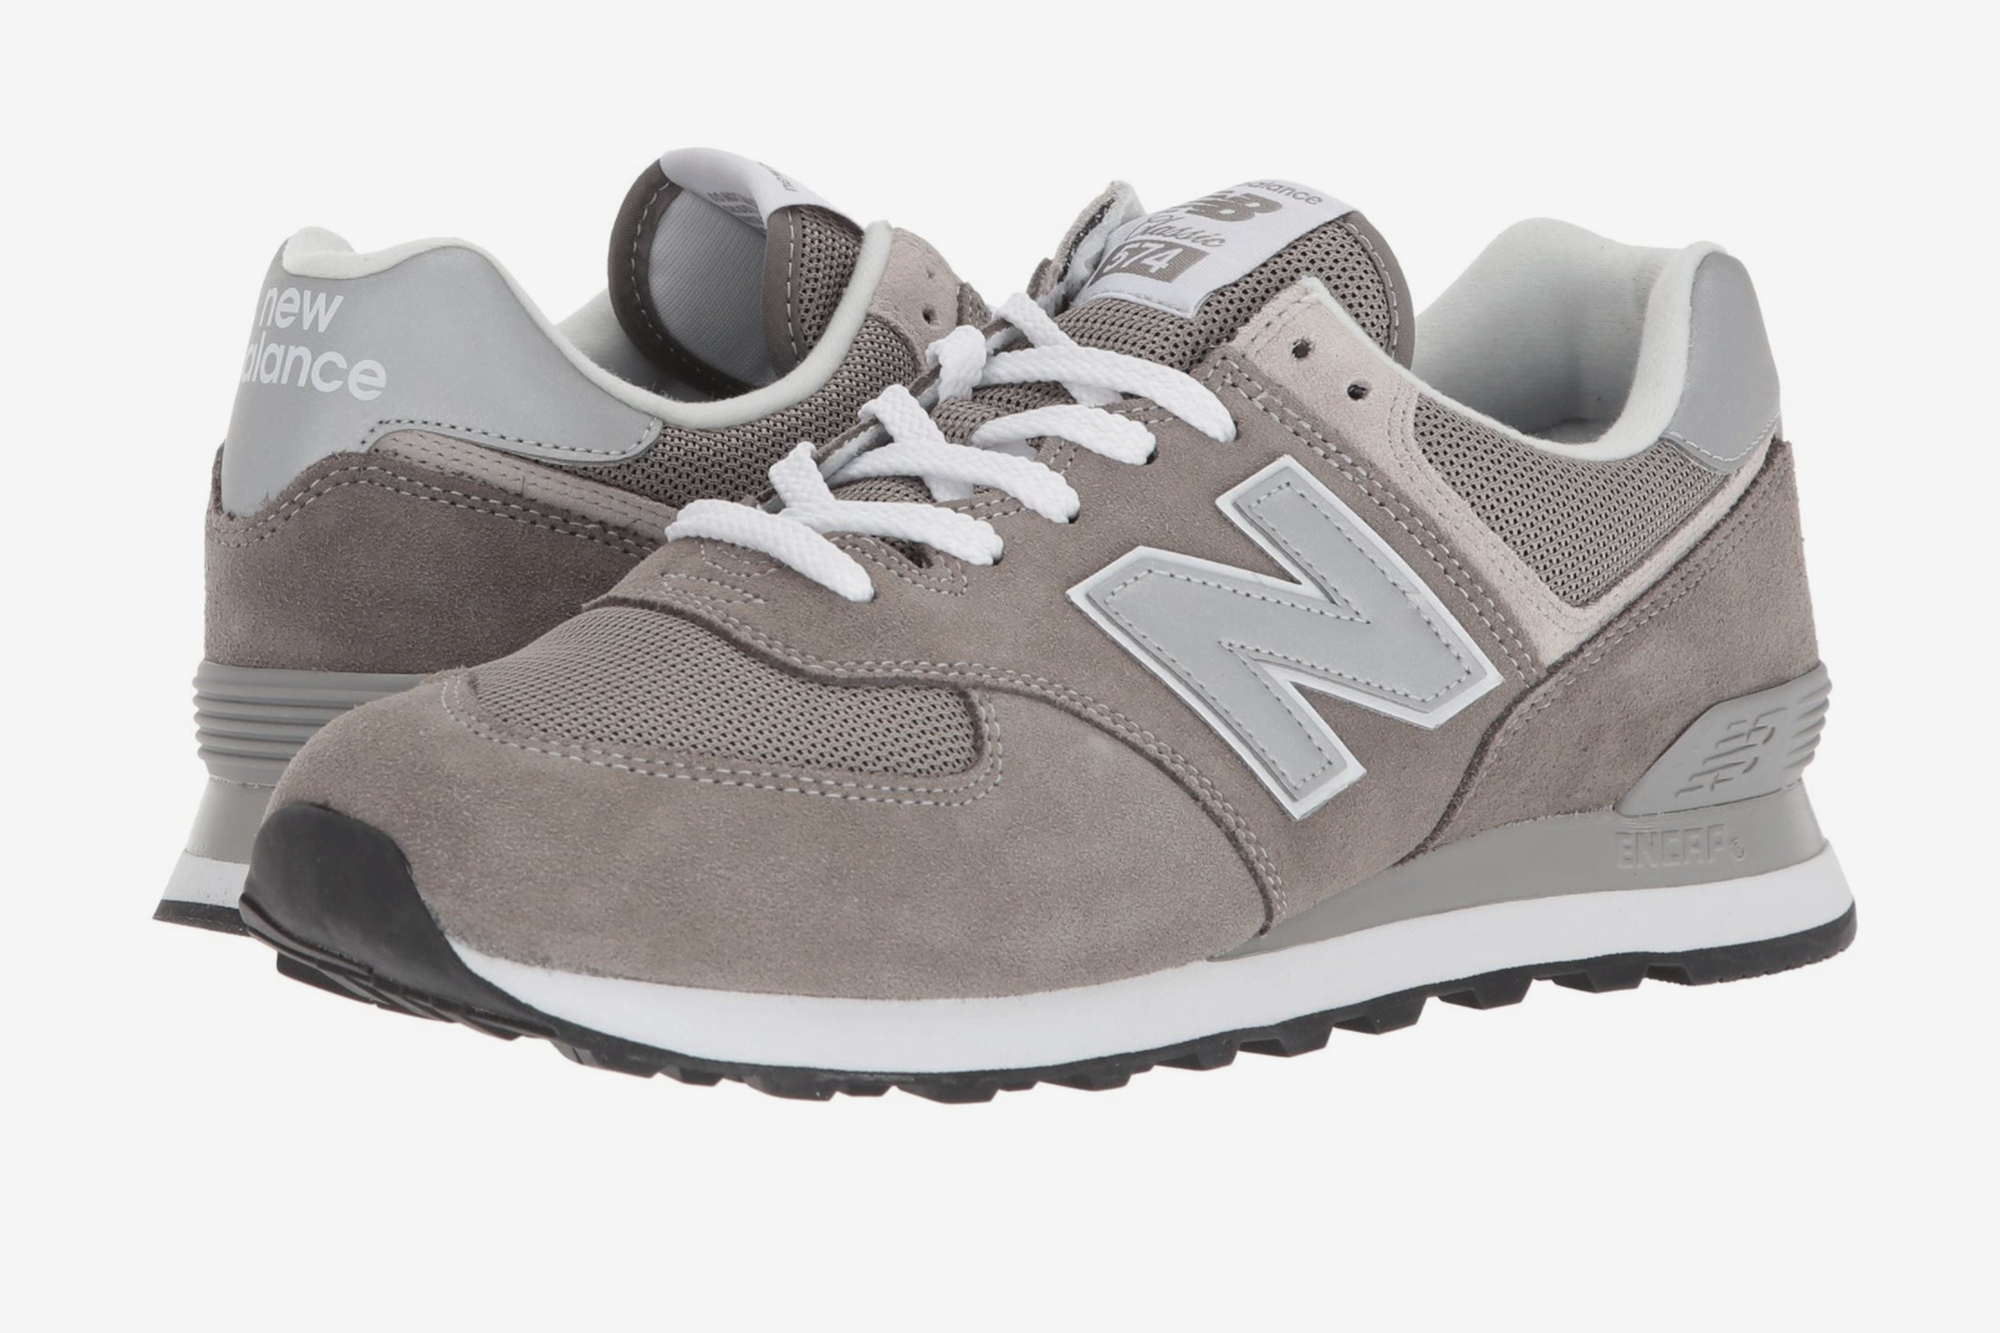 cambiar Inspector Redondear a la baja These Neutral New Balance Sneakers Are Your New Go-To Shoes!